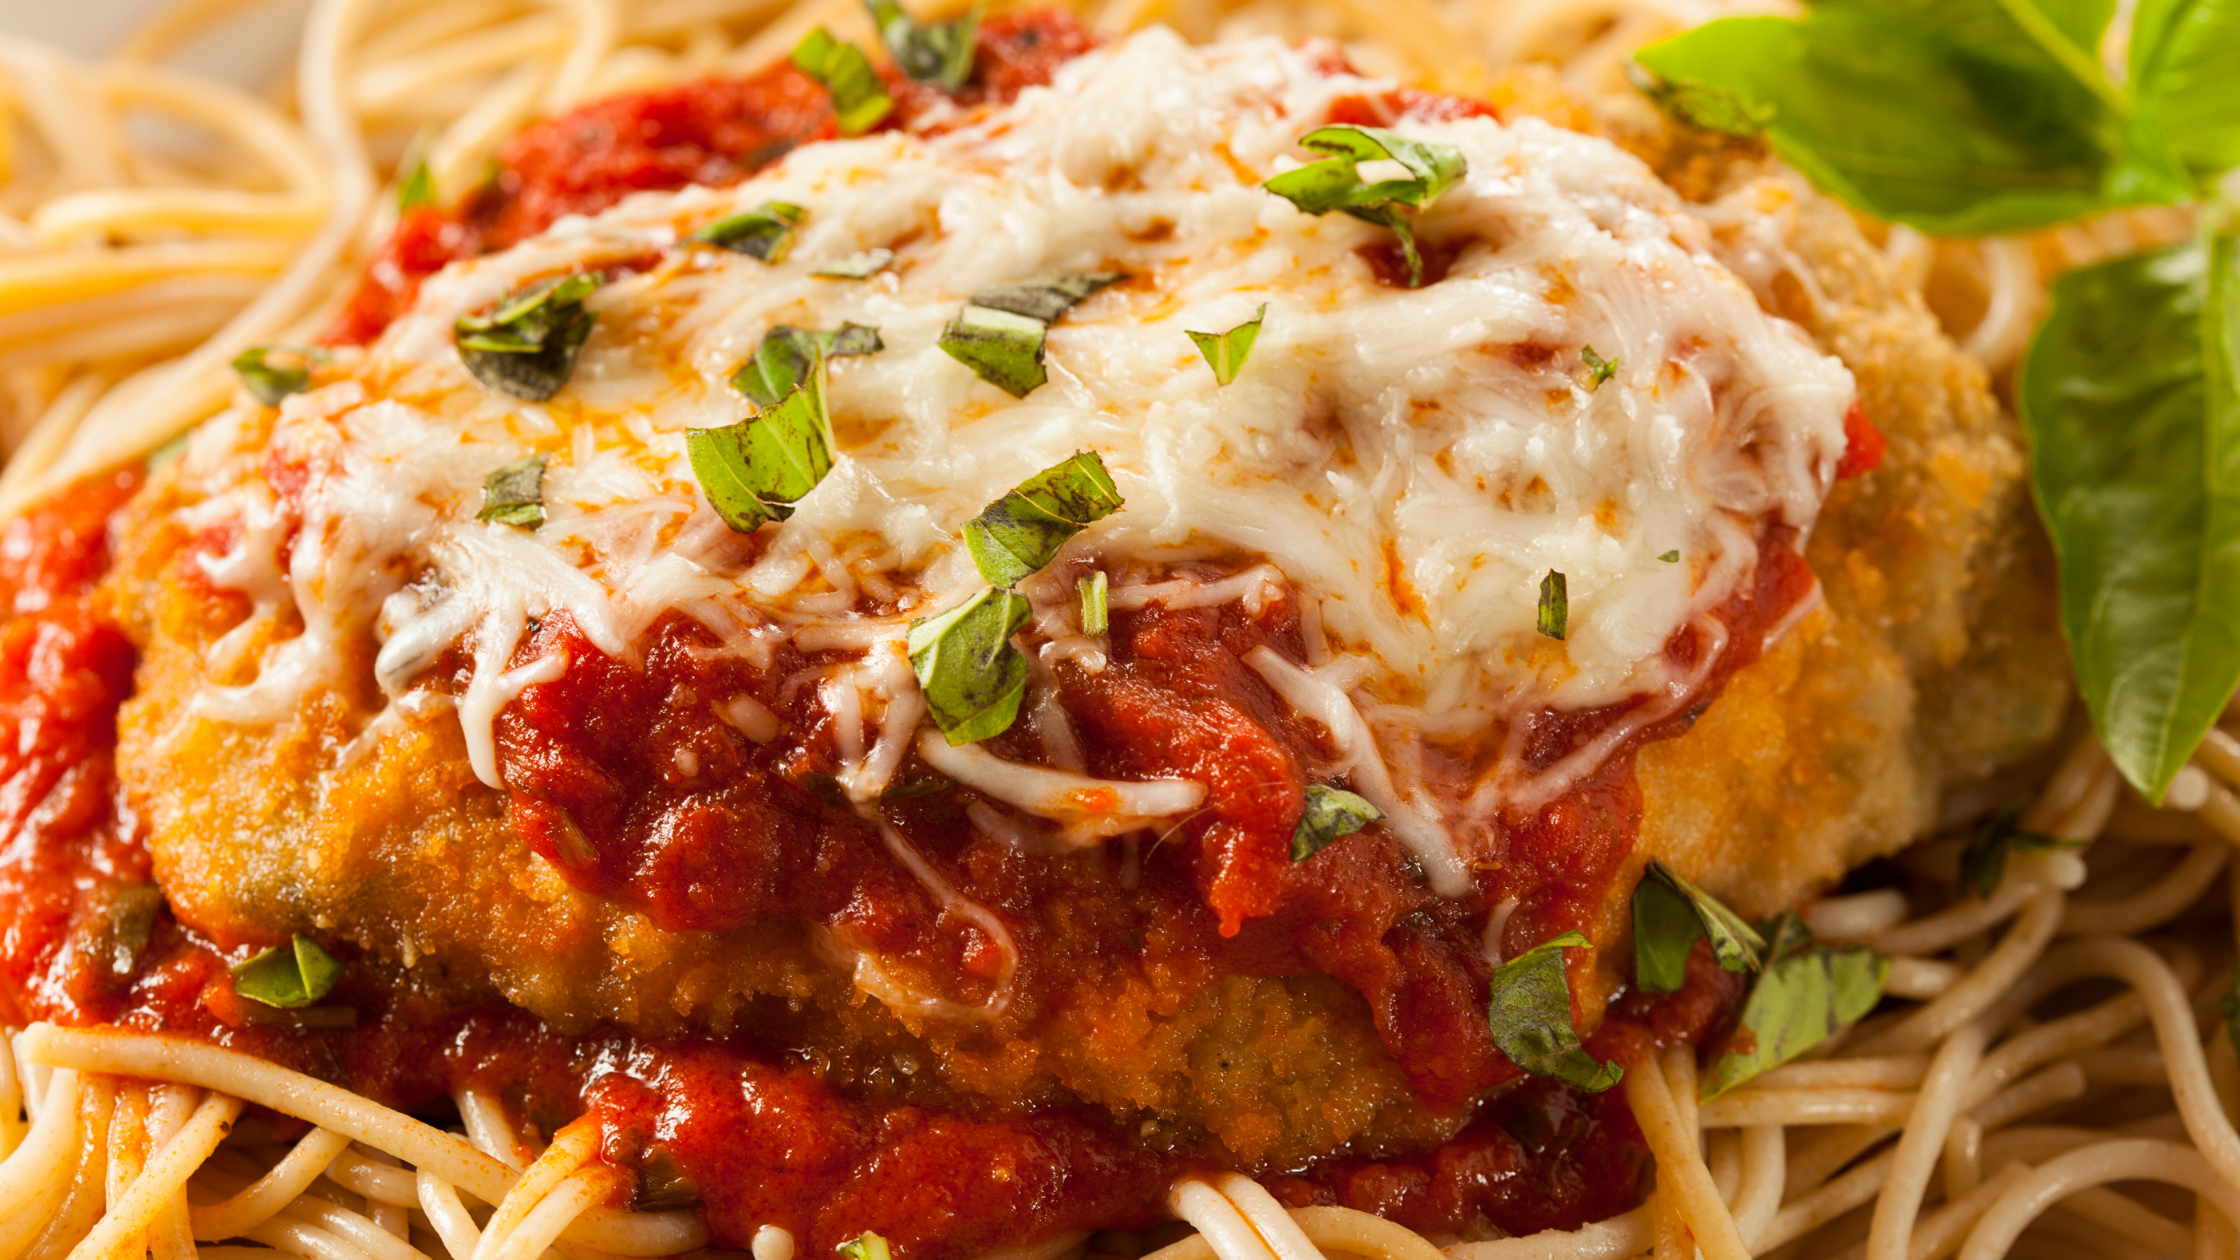 Low Calorie Chicken Parmesan with Whole Grain Spaghetti: A Healthy Recipe for Delicious Italian Food 19